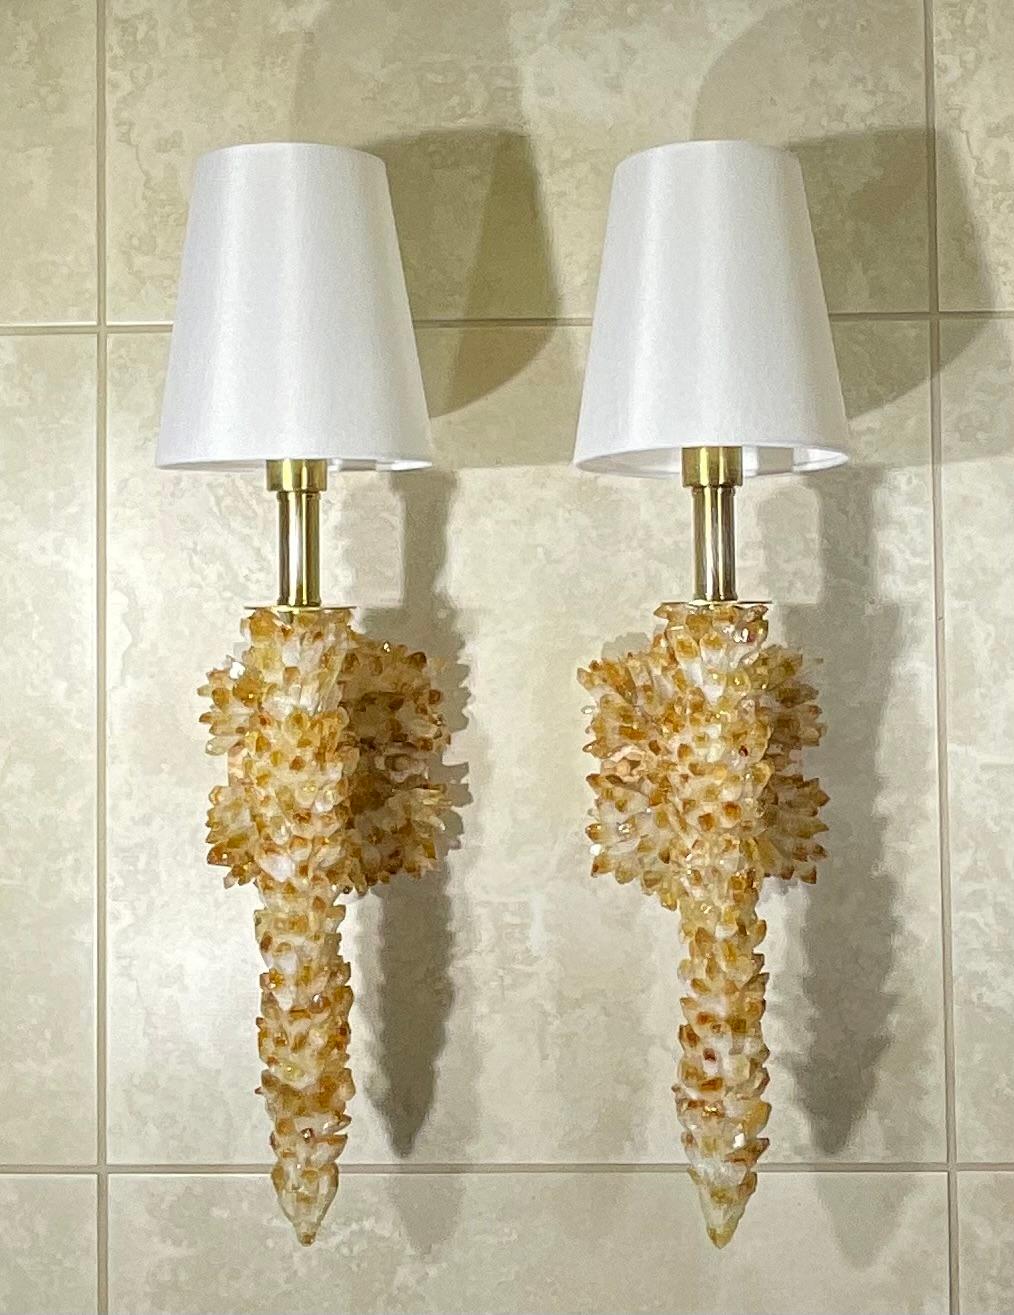 One of a kind 
Exceptional pair of wall sconces artistically made of small real citrine crystals  point,  one 40/watt light each light .
Beautiful object of art for work display.
